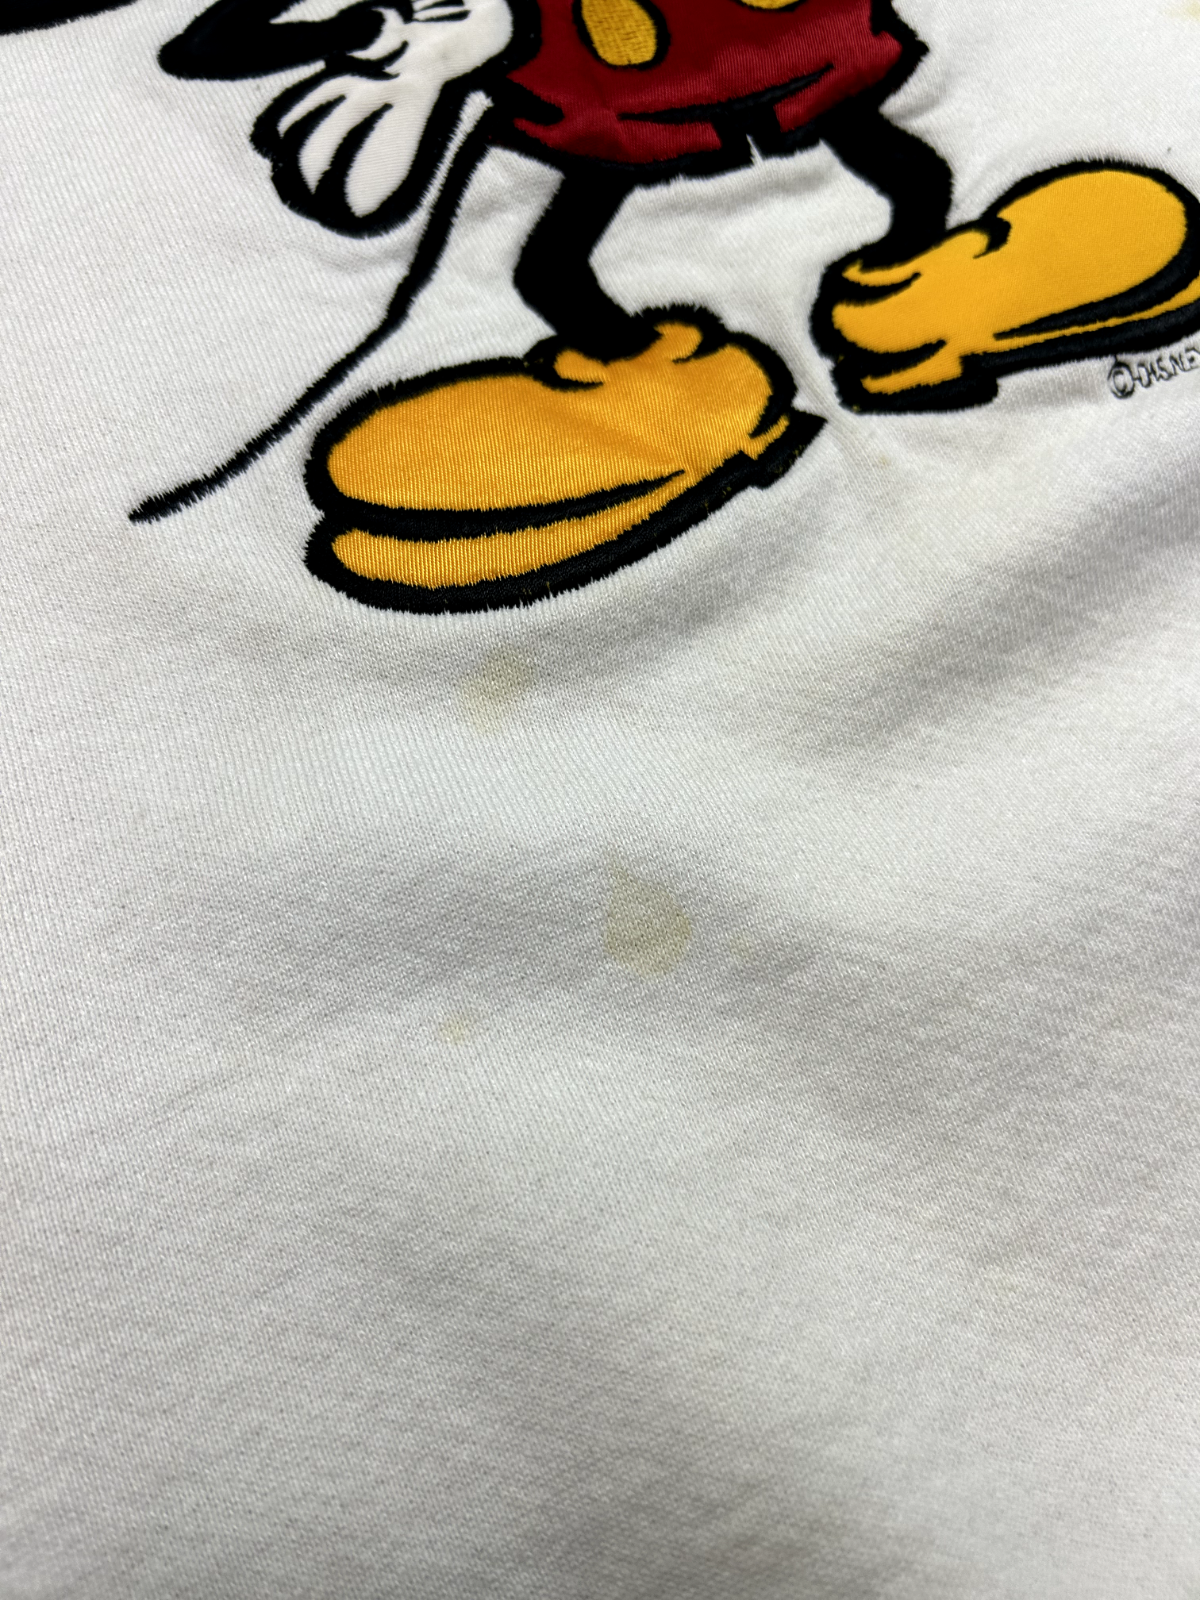 Vintage 90s Disney Mickey Mouse Embroidered Character Sweatshirt Size XL White